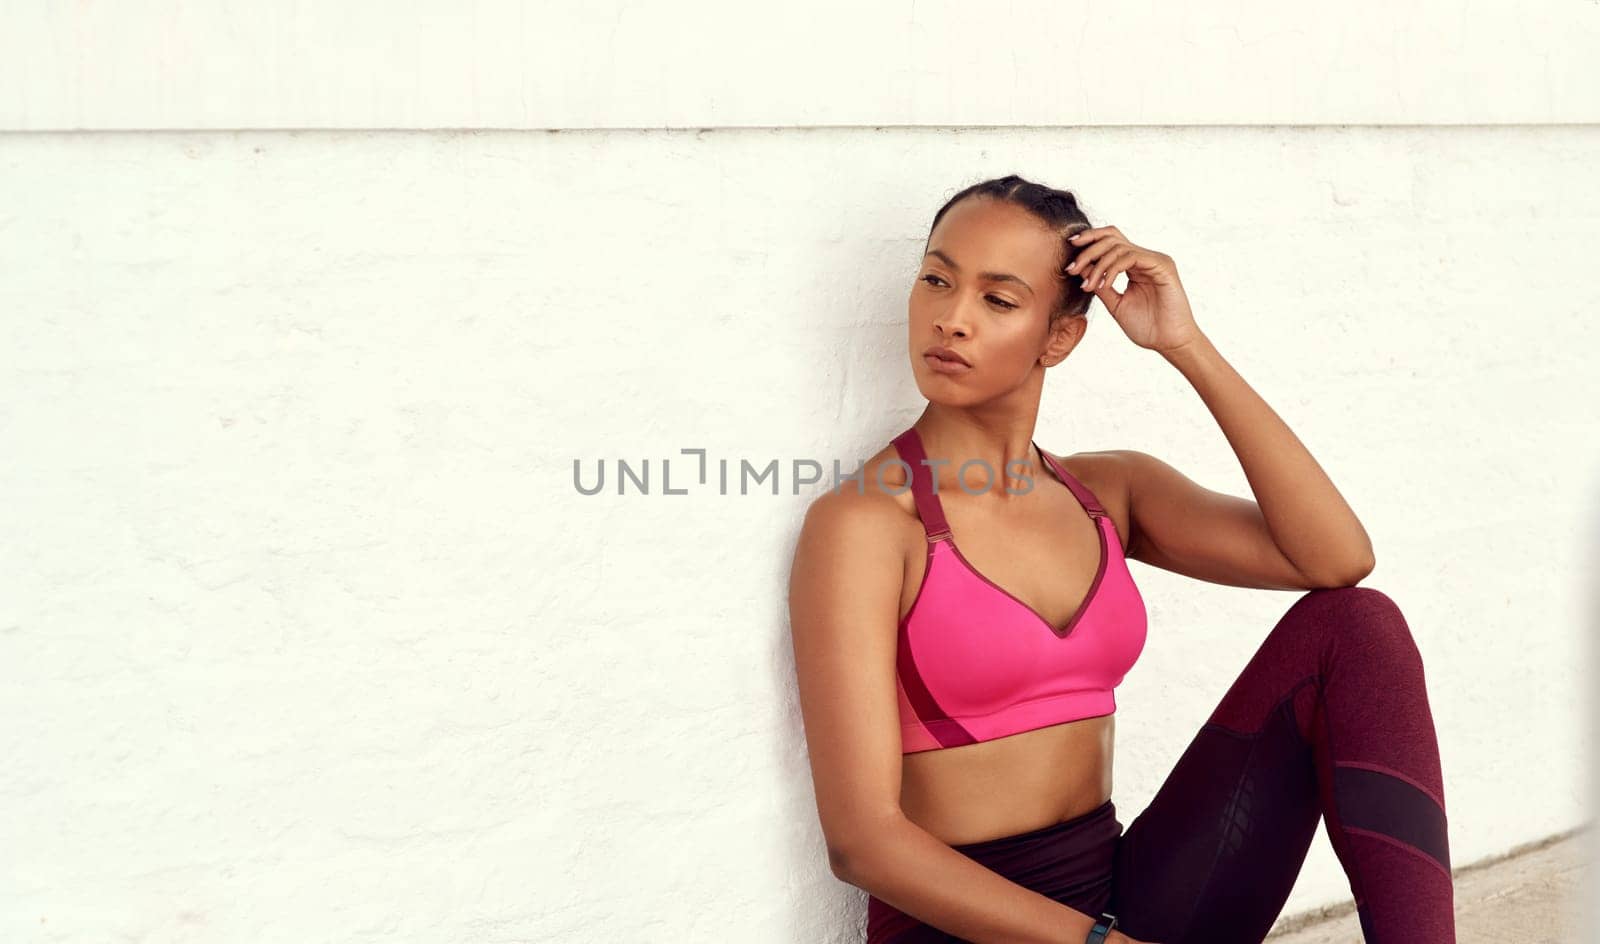 Black woman, thinking and exercise break in sportswear for fitness and healthy in New York. Lifestyle, female person and satisfied with self care or wellbeing in summer and confident with results.